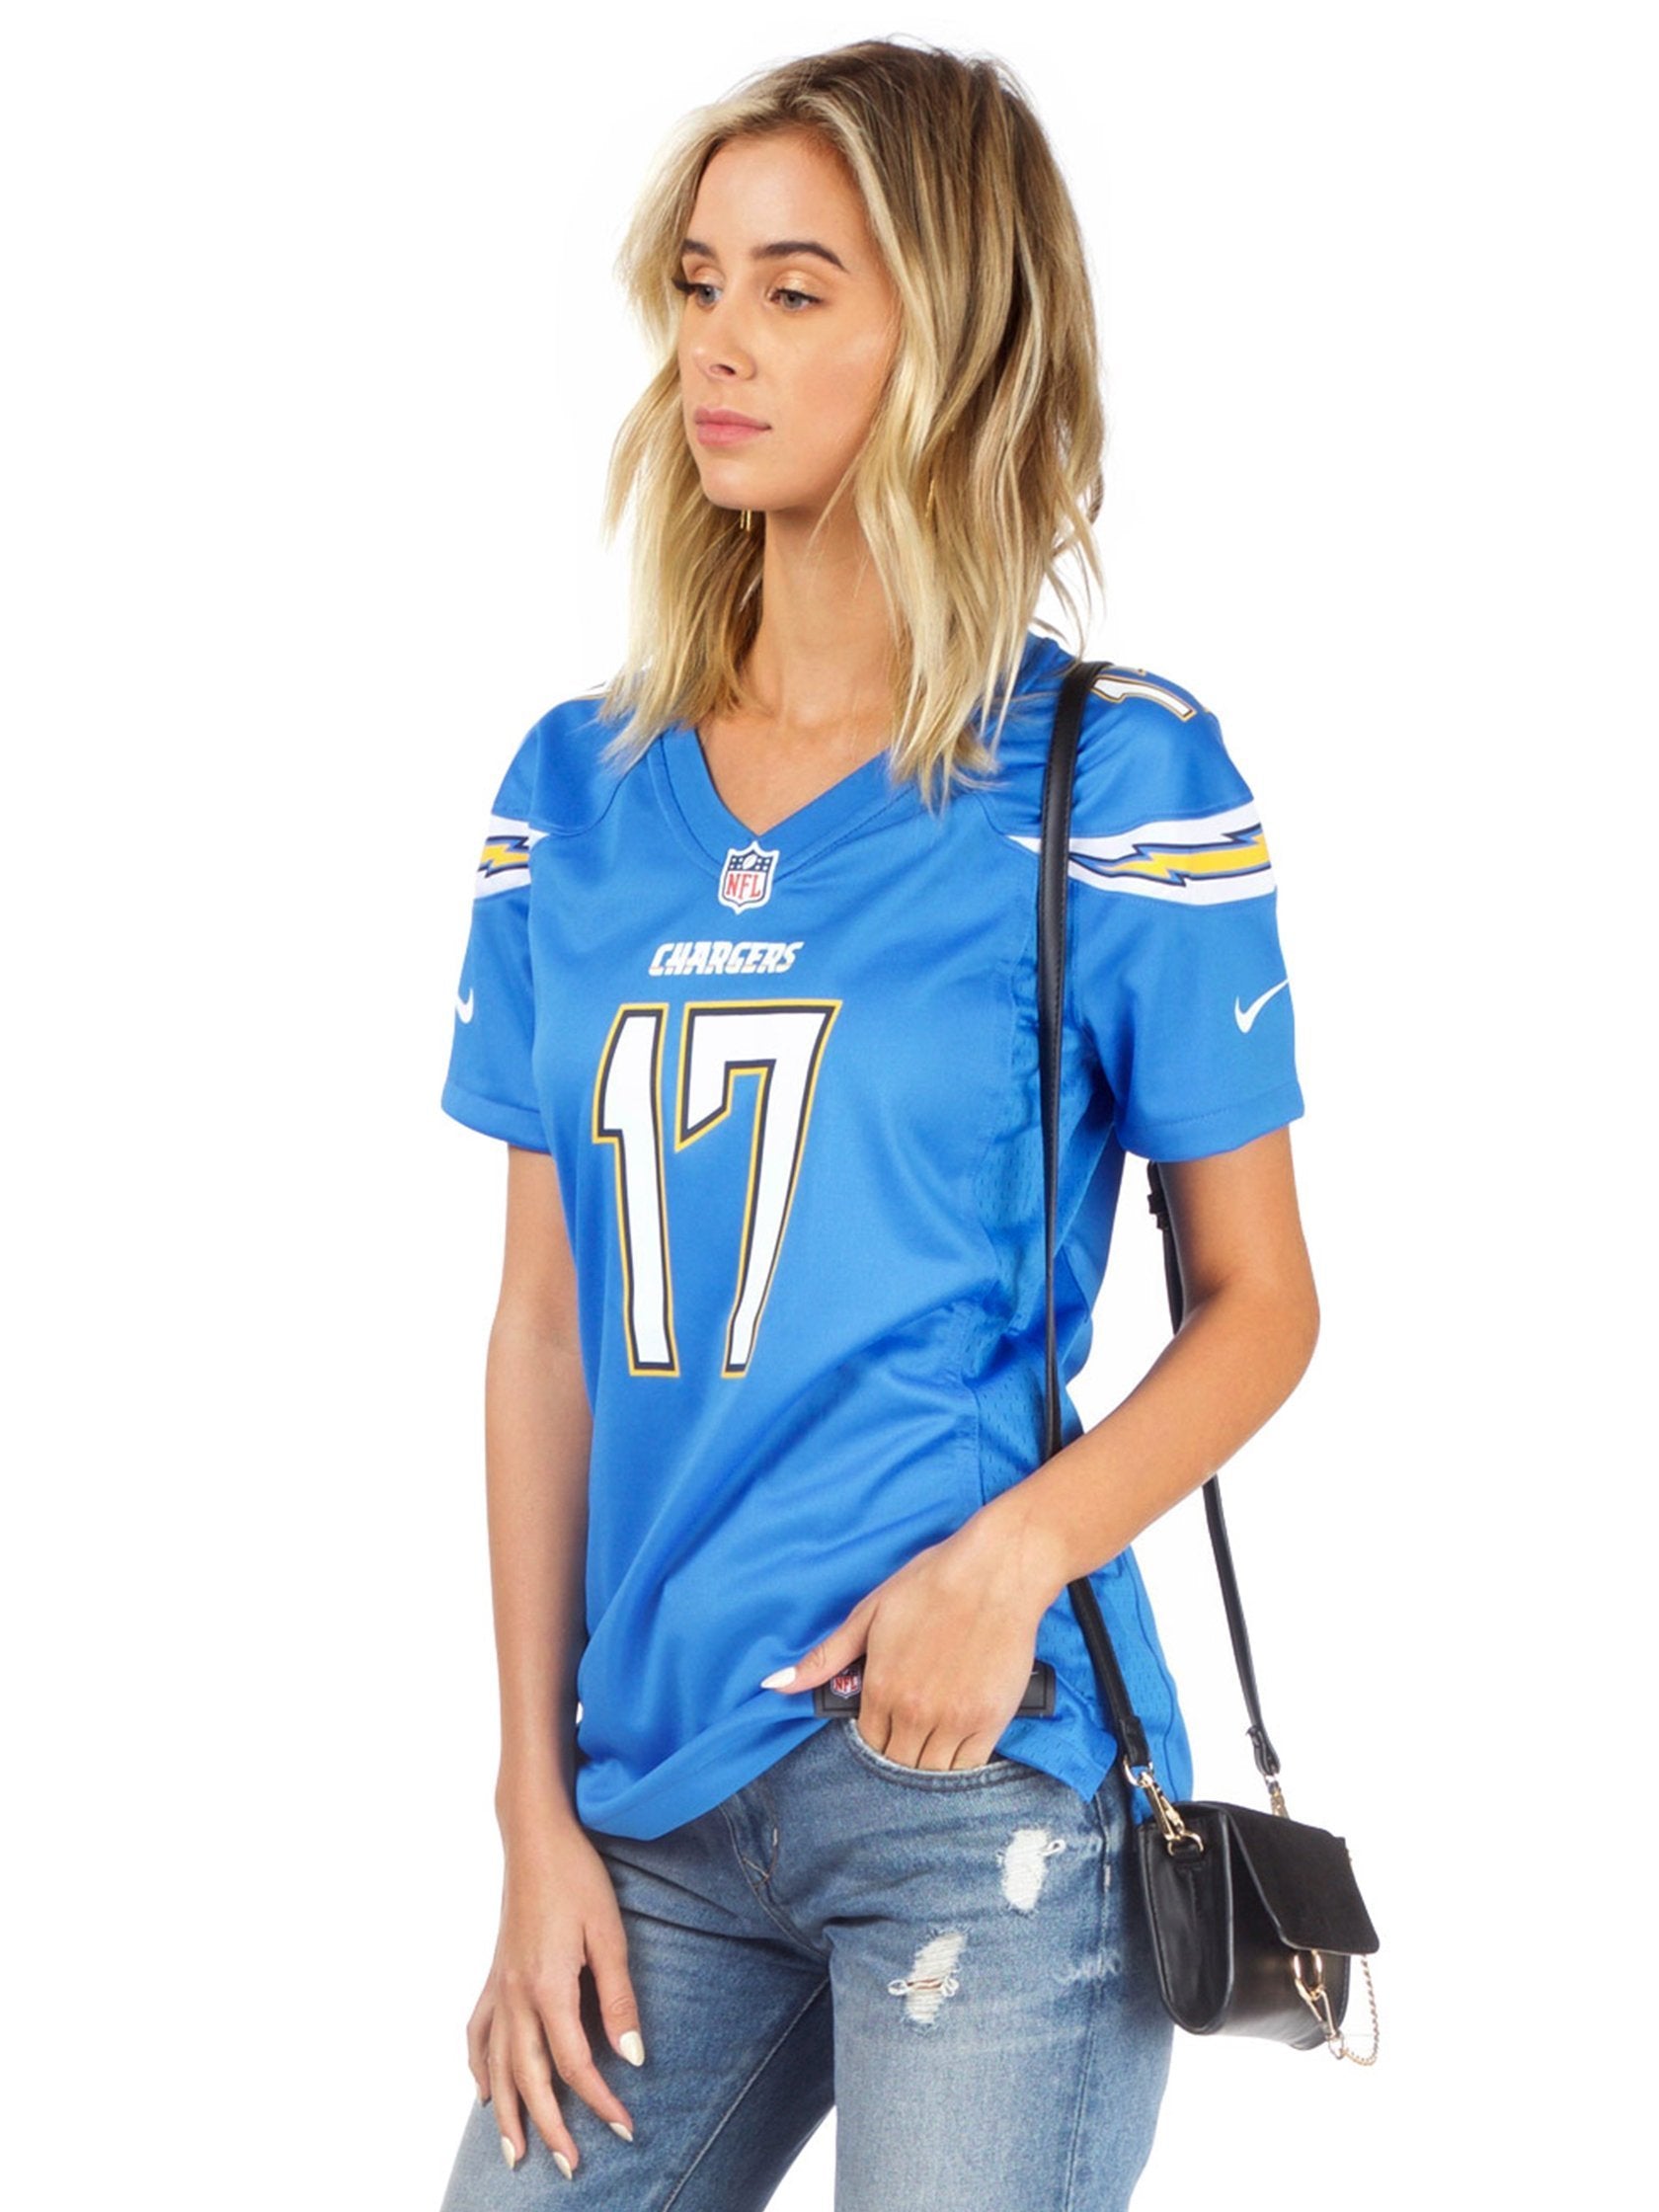 Women wearing a top rental from FashionPass called La Chargers Jersey